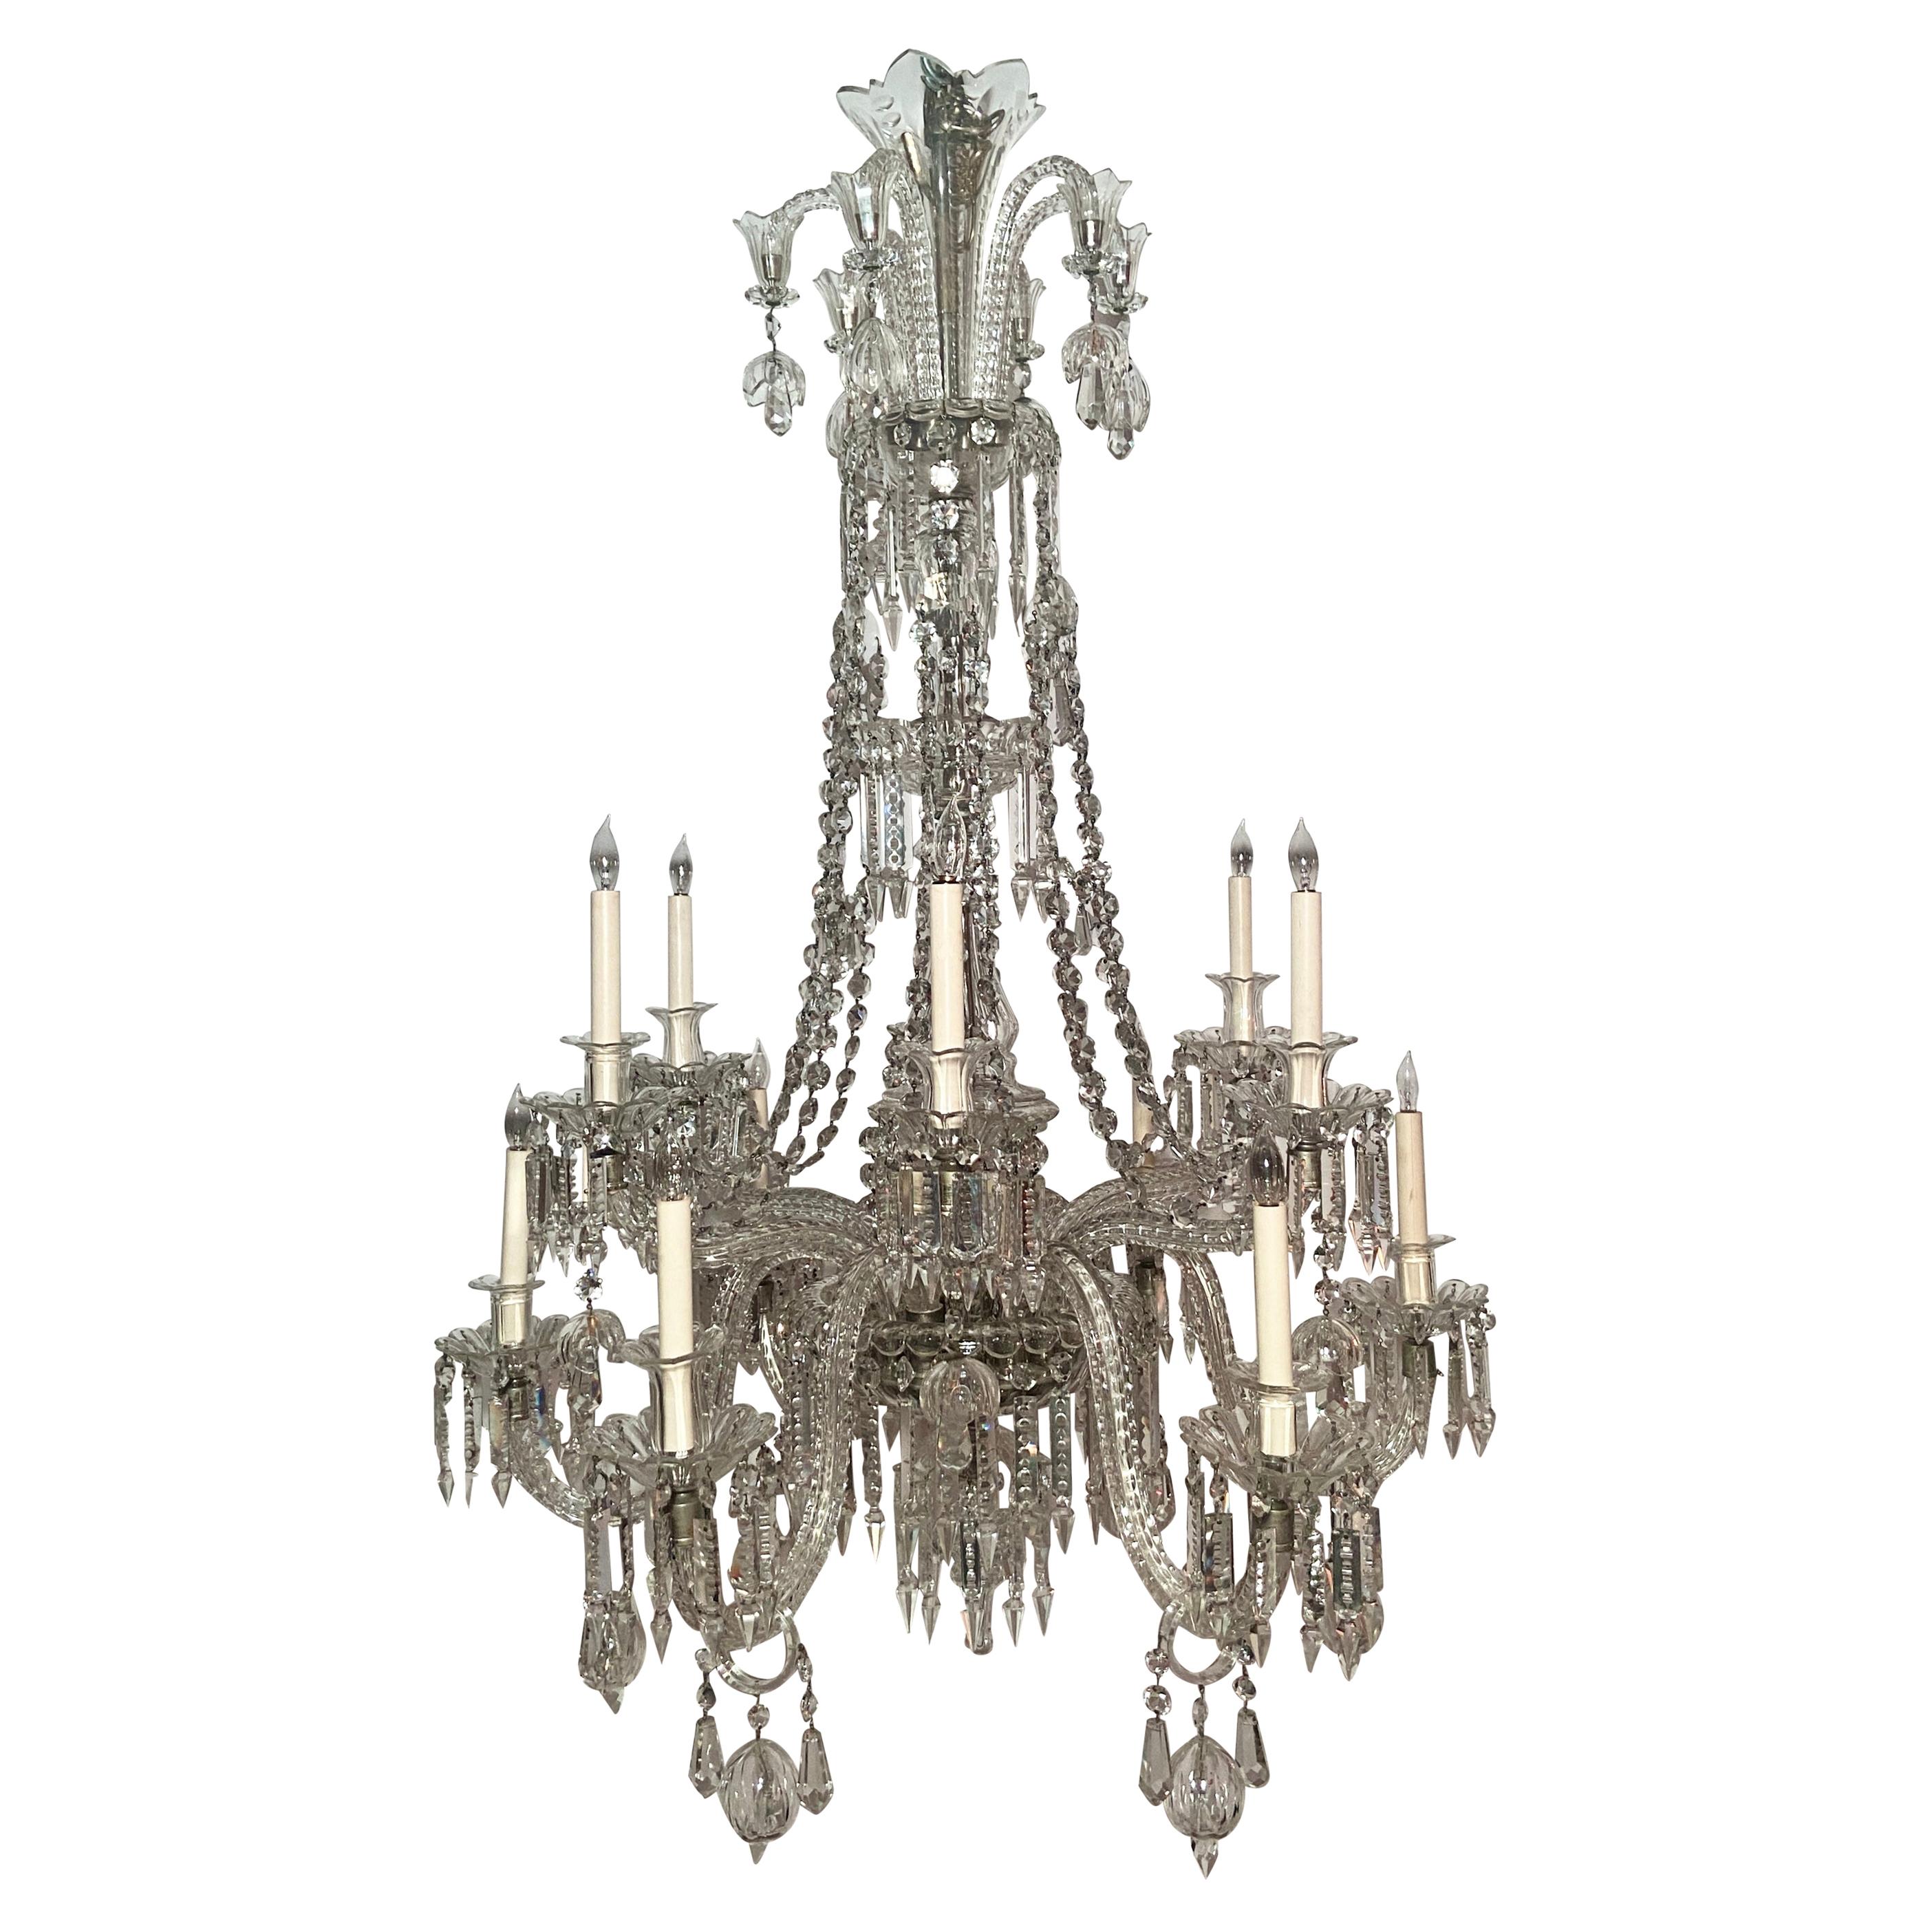 Do crystal chandeliers contain lead?